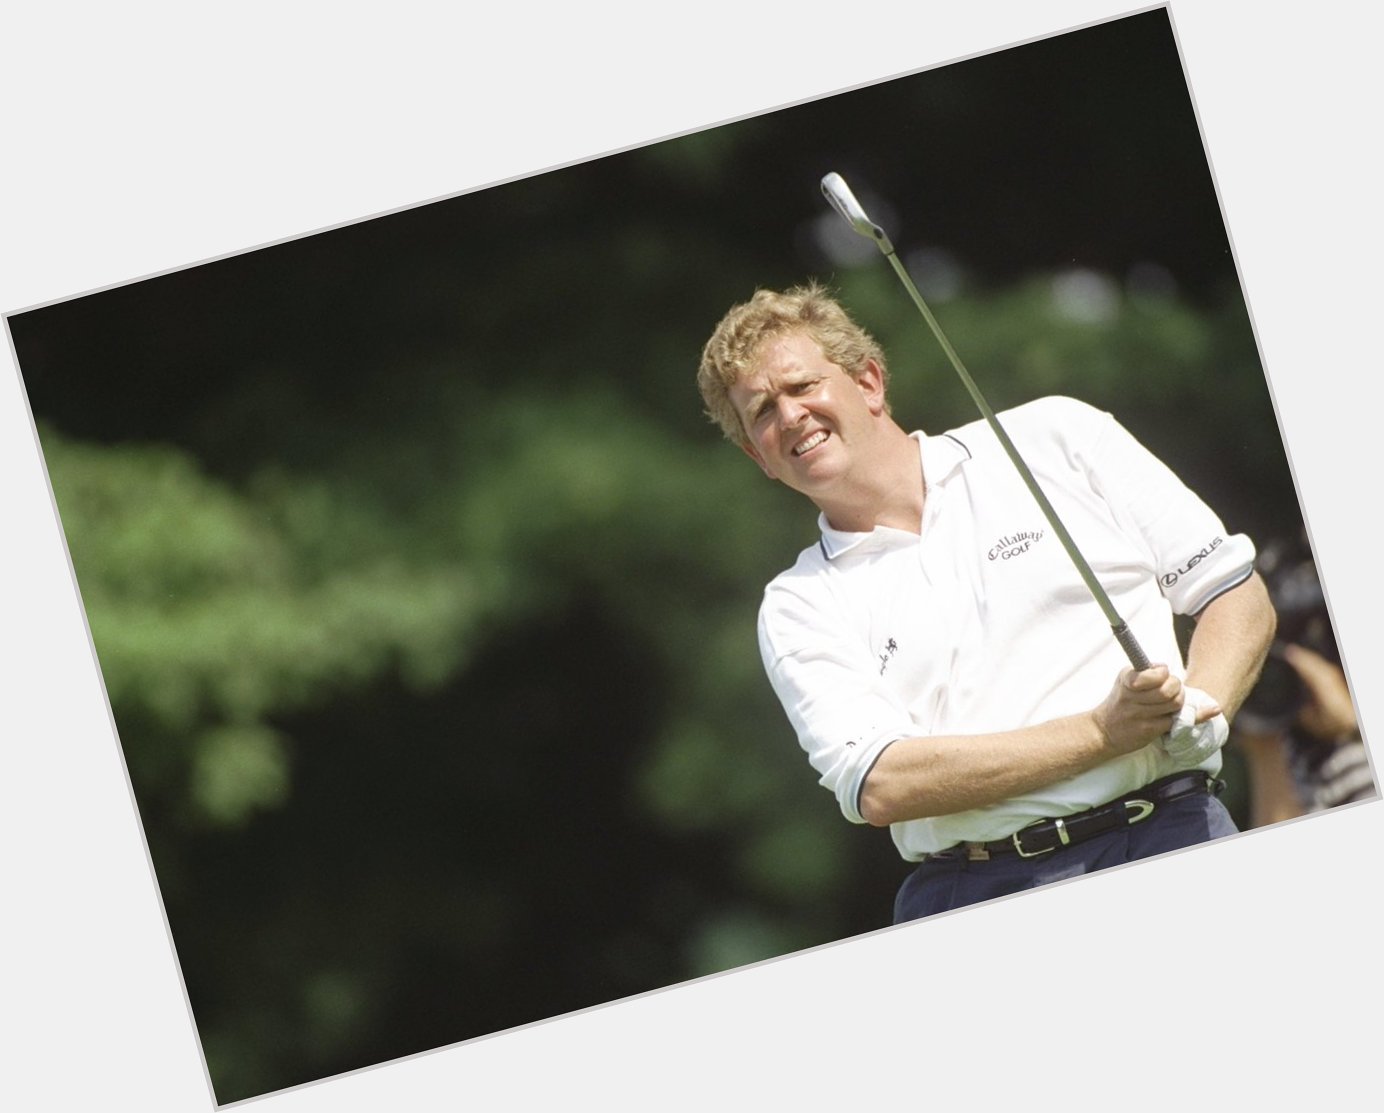  Happy Birthday, Colin Montgomerie! What\s your favourite memory of Monty from down the years? 